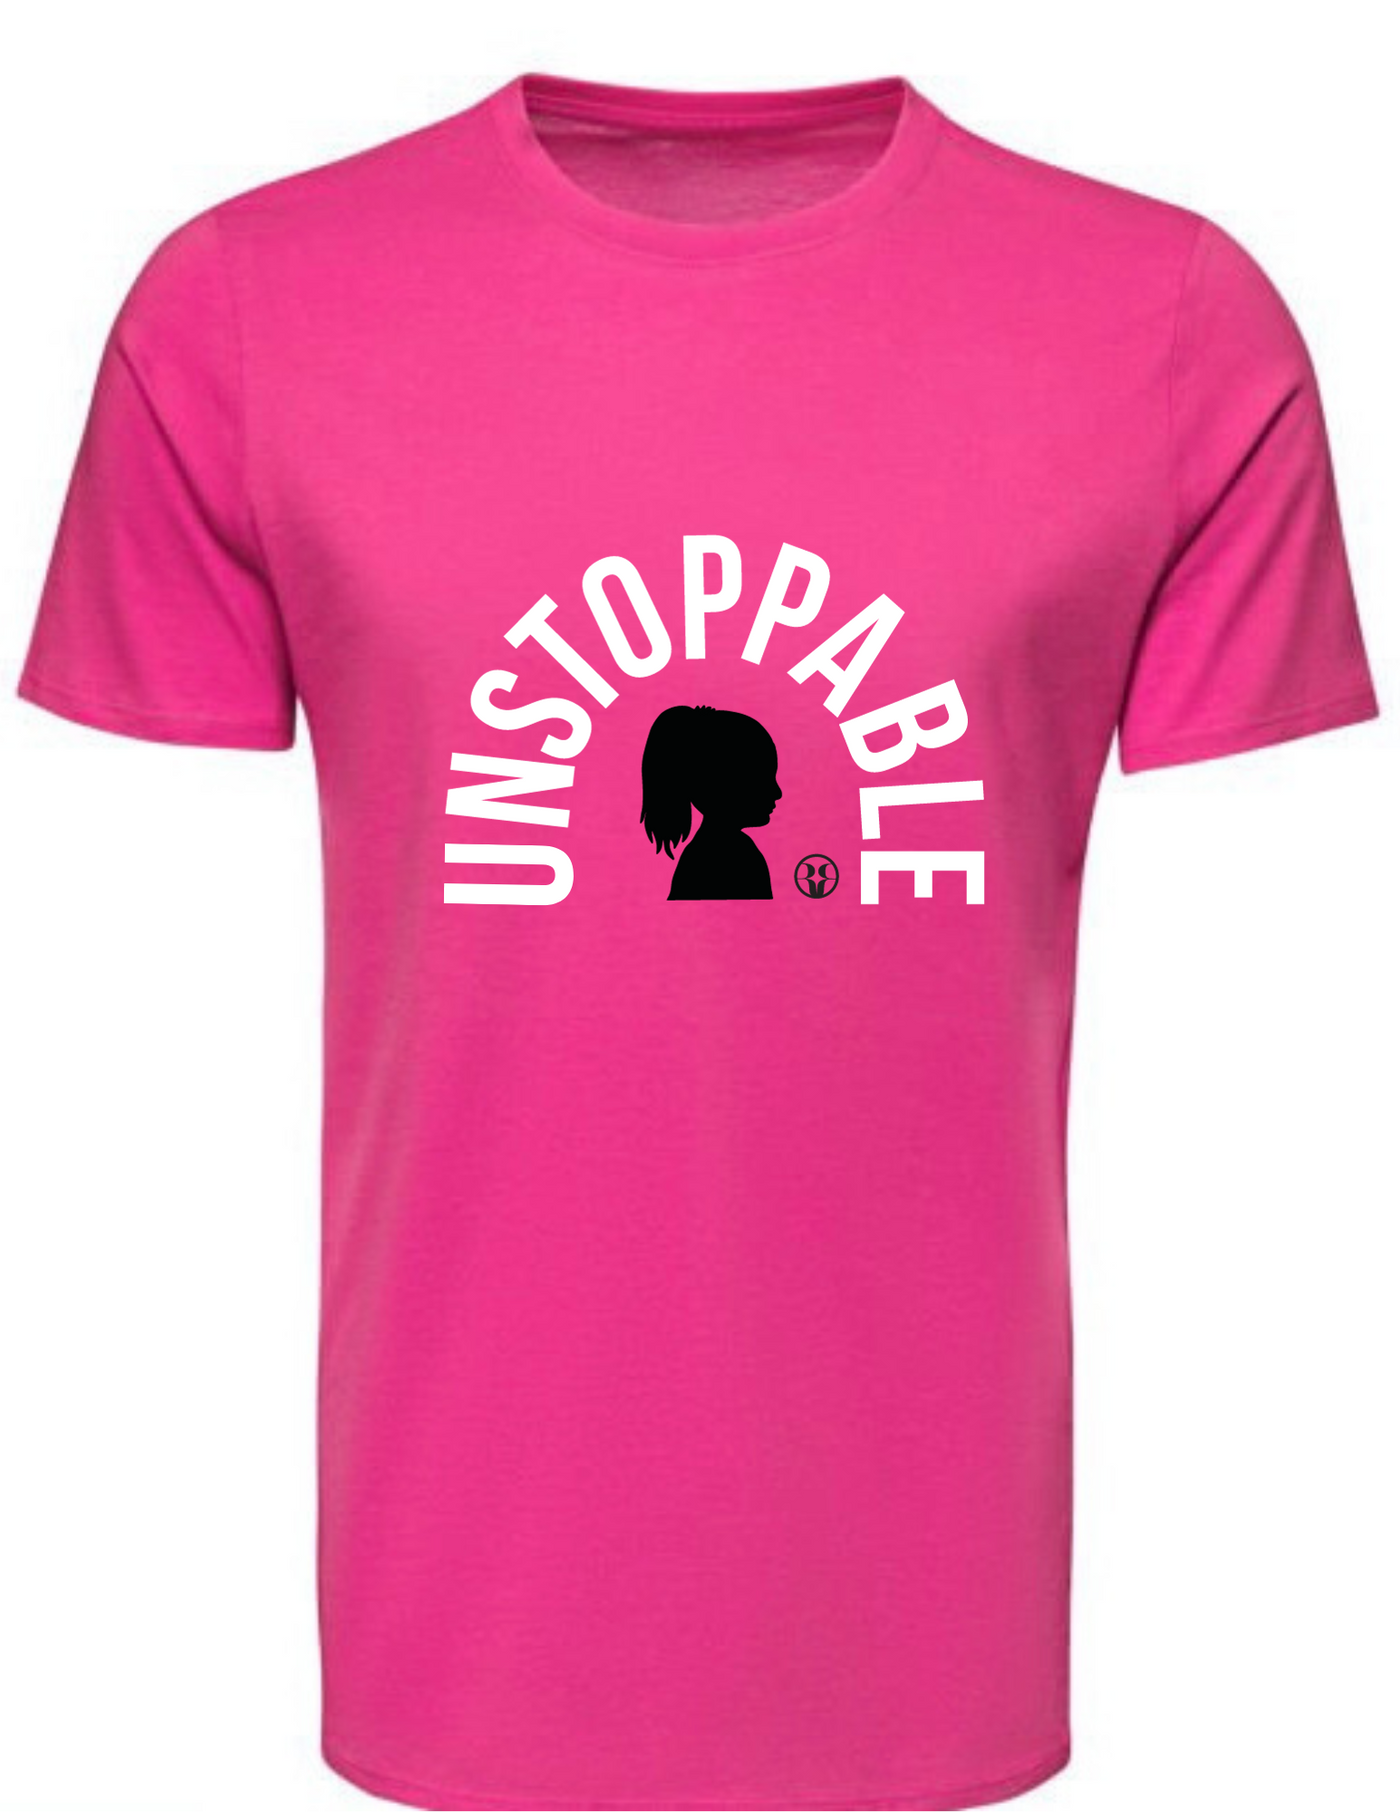 Unstoppable Raspberry Pink